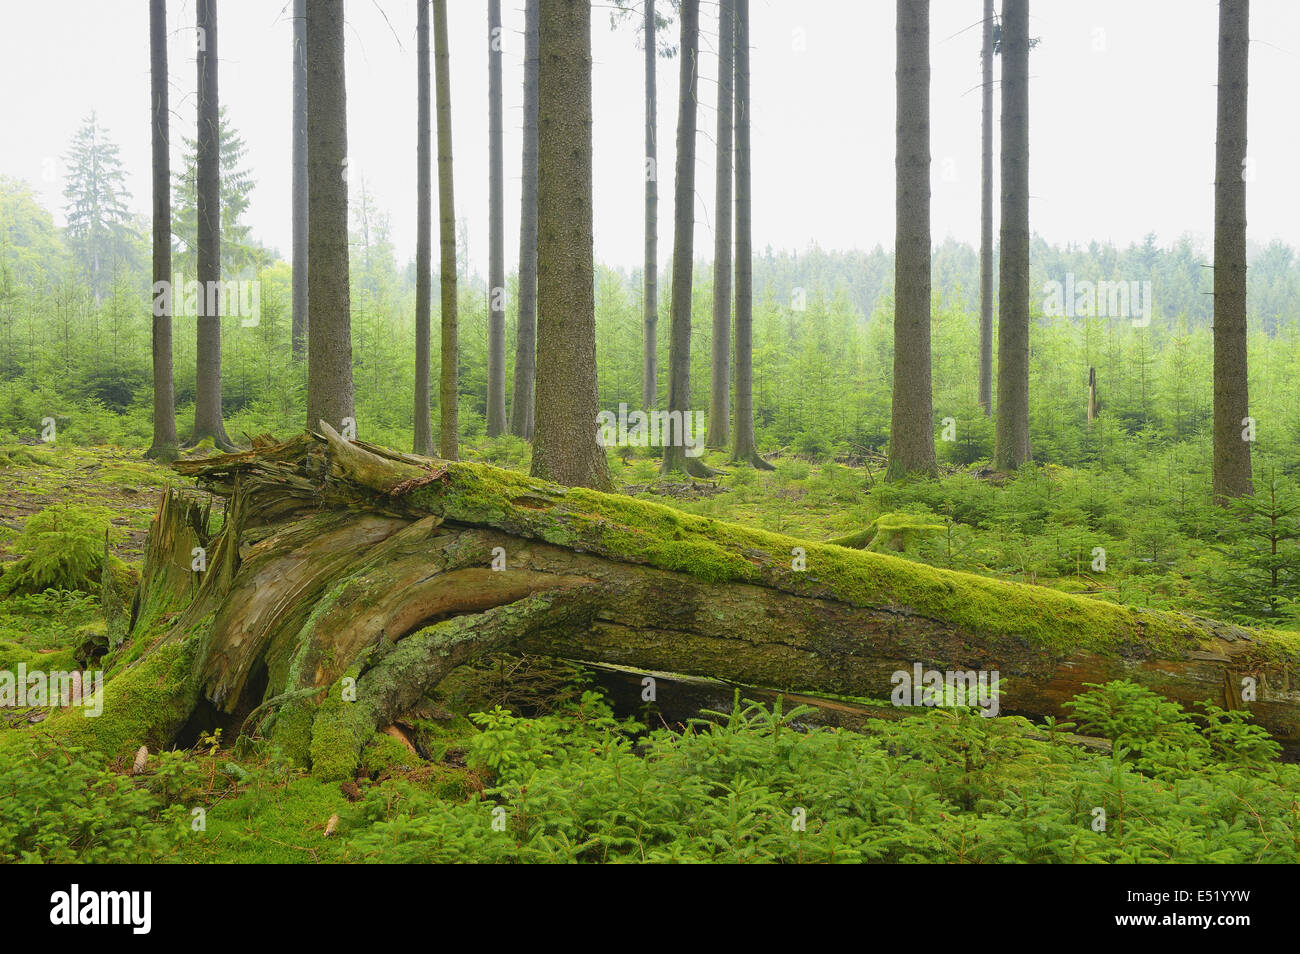 Spruce forest, Germany Stock Photo